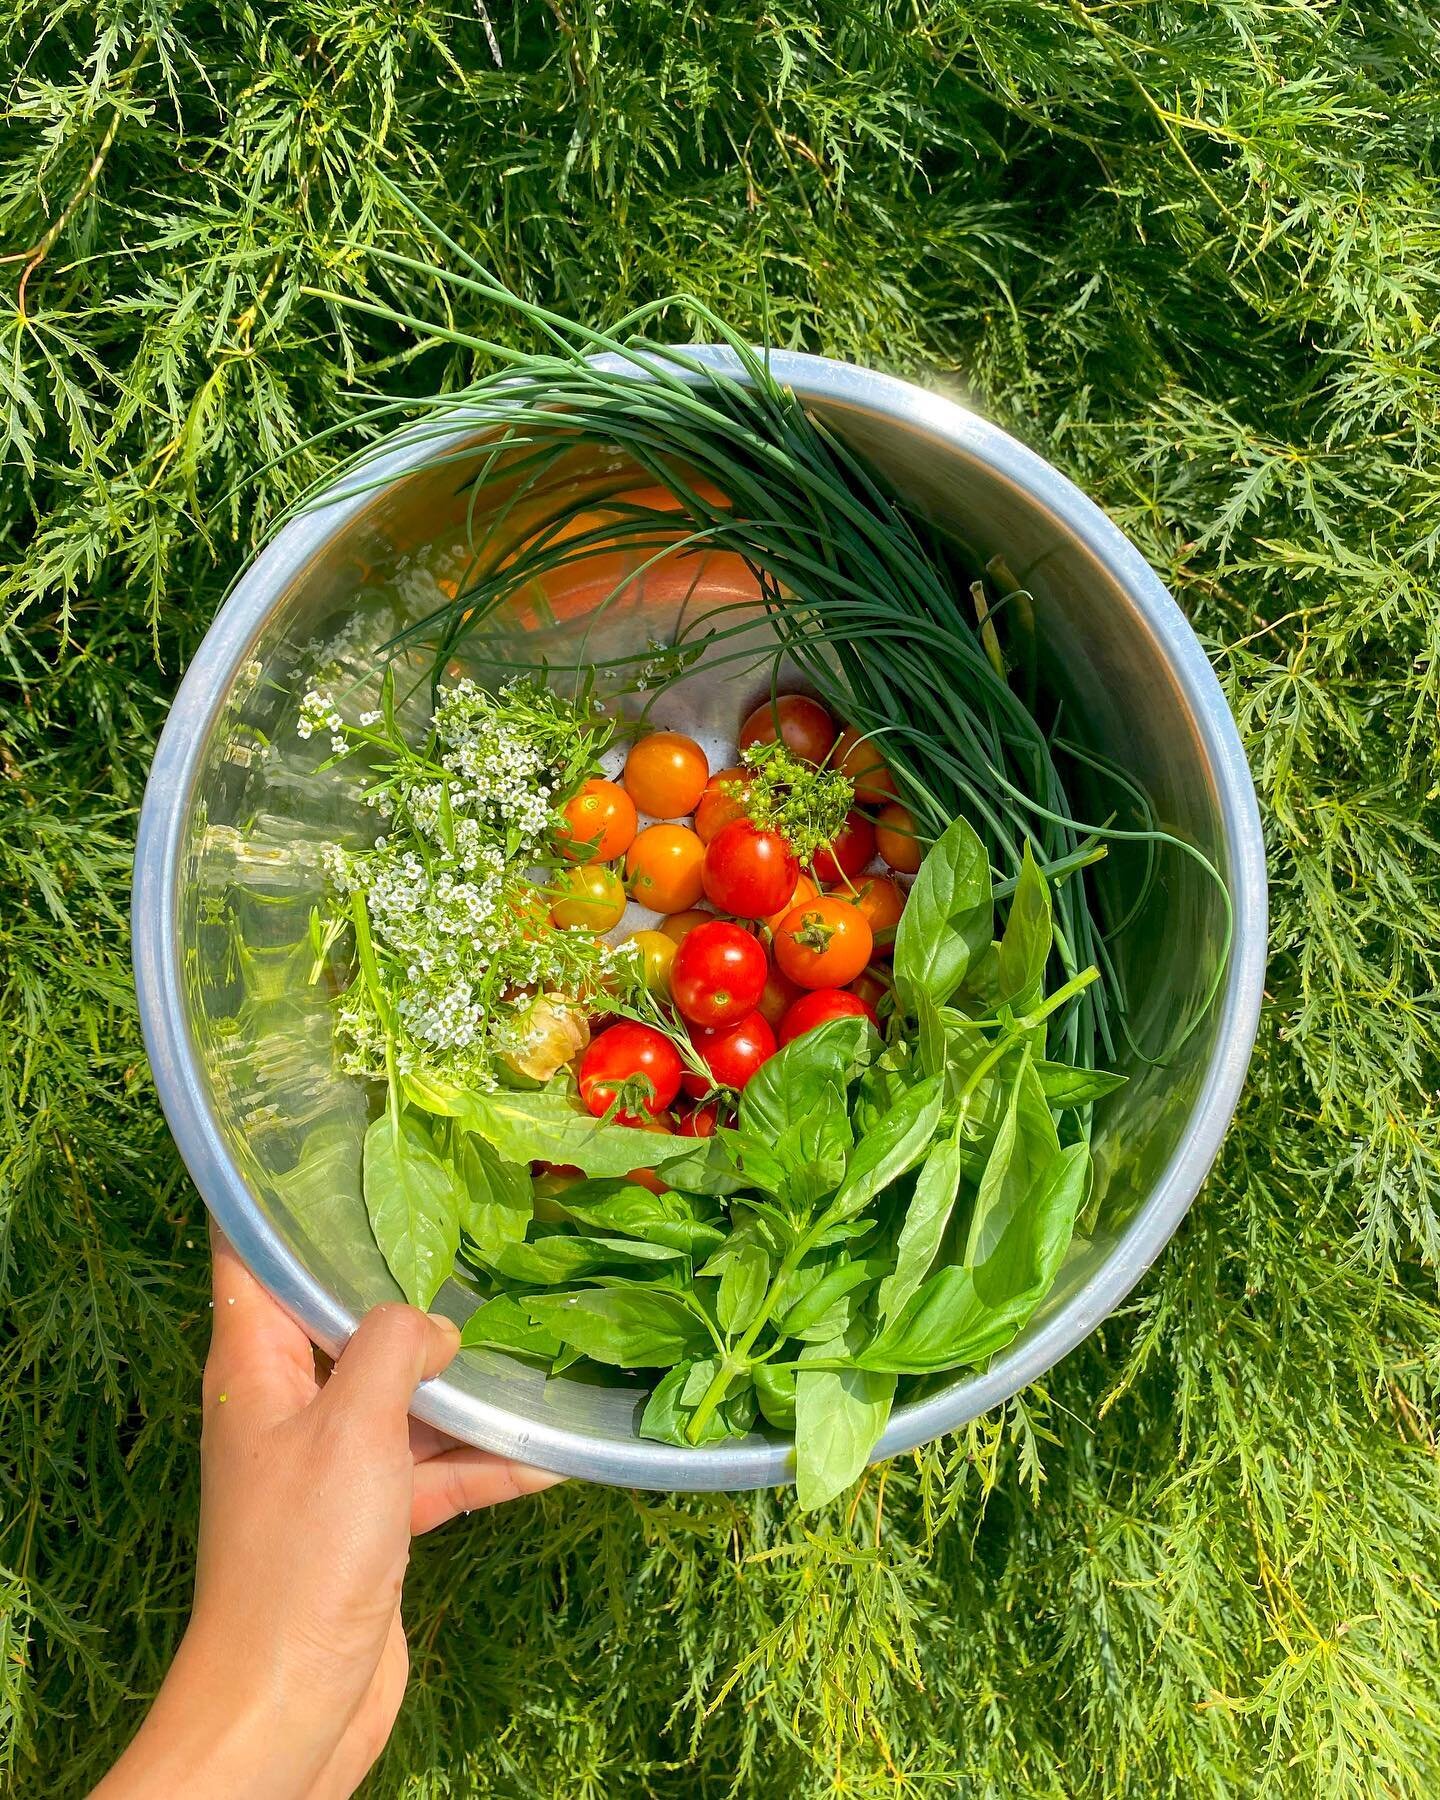 Grow food that makes you feel good - no matter the size, every harvest is a reflection of your strength, will, and freedom. Learn what to do with your harvest along with other simple recipes at freedom-gardens.com 🍴🌱🍅